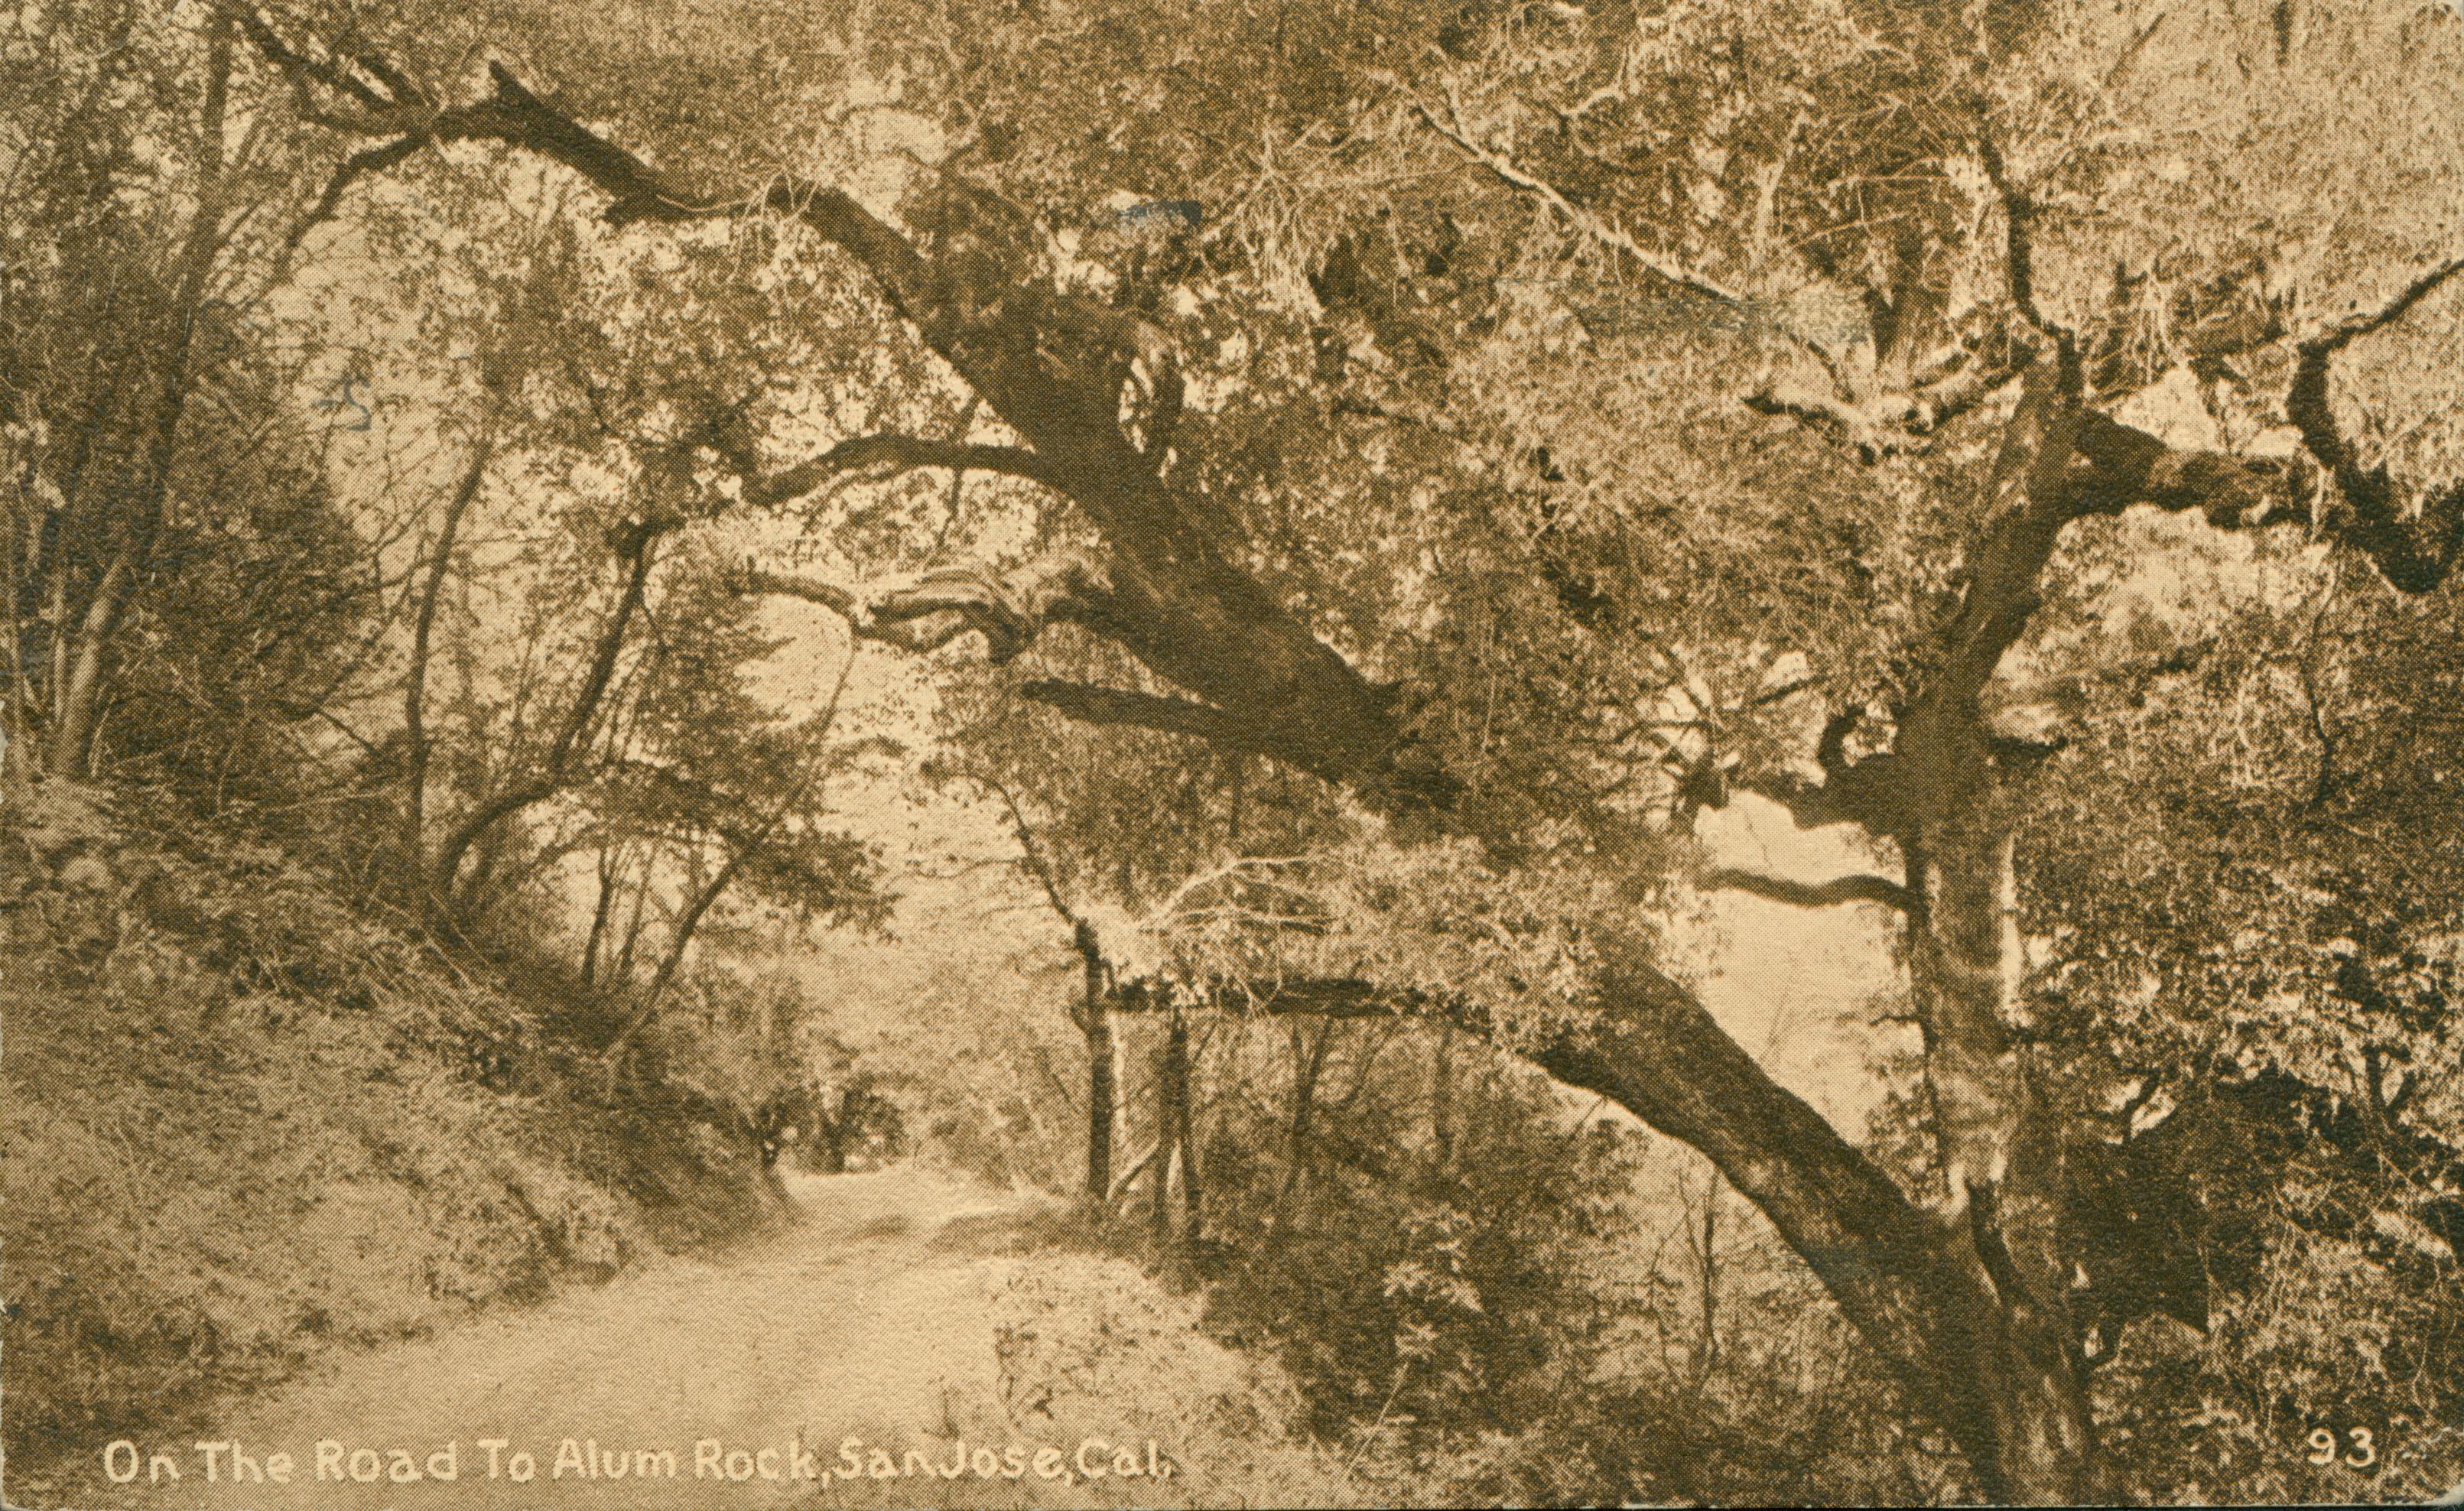 View of dirt road parallel to hillside with trees surrounding the road and hillside